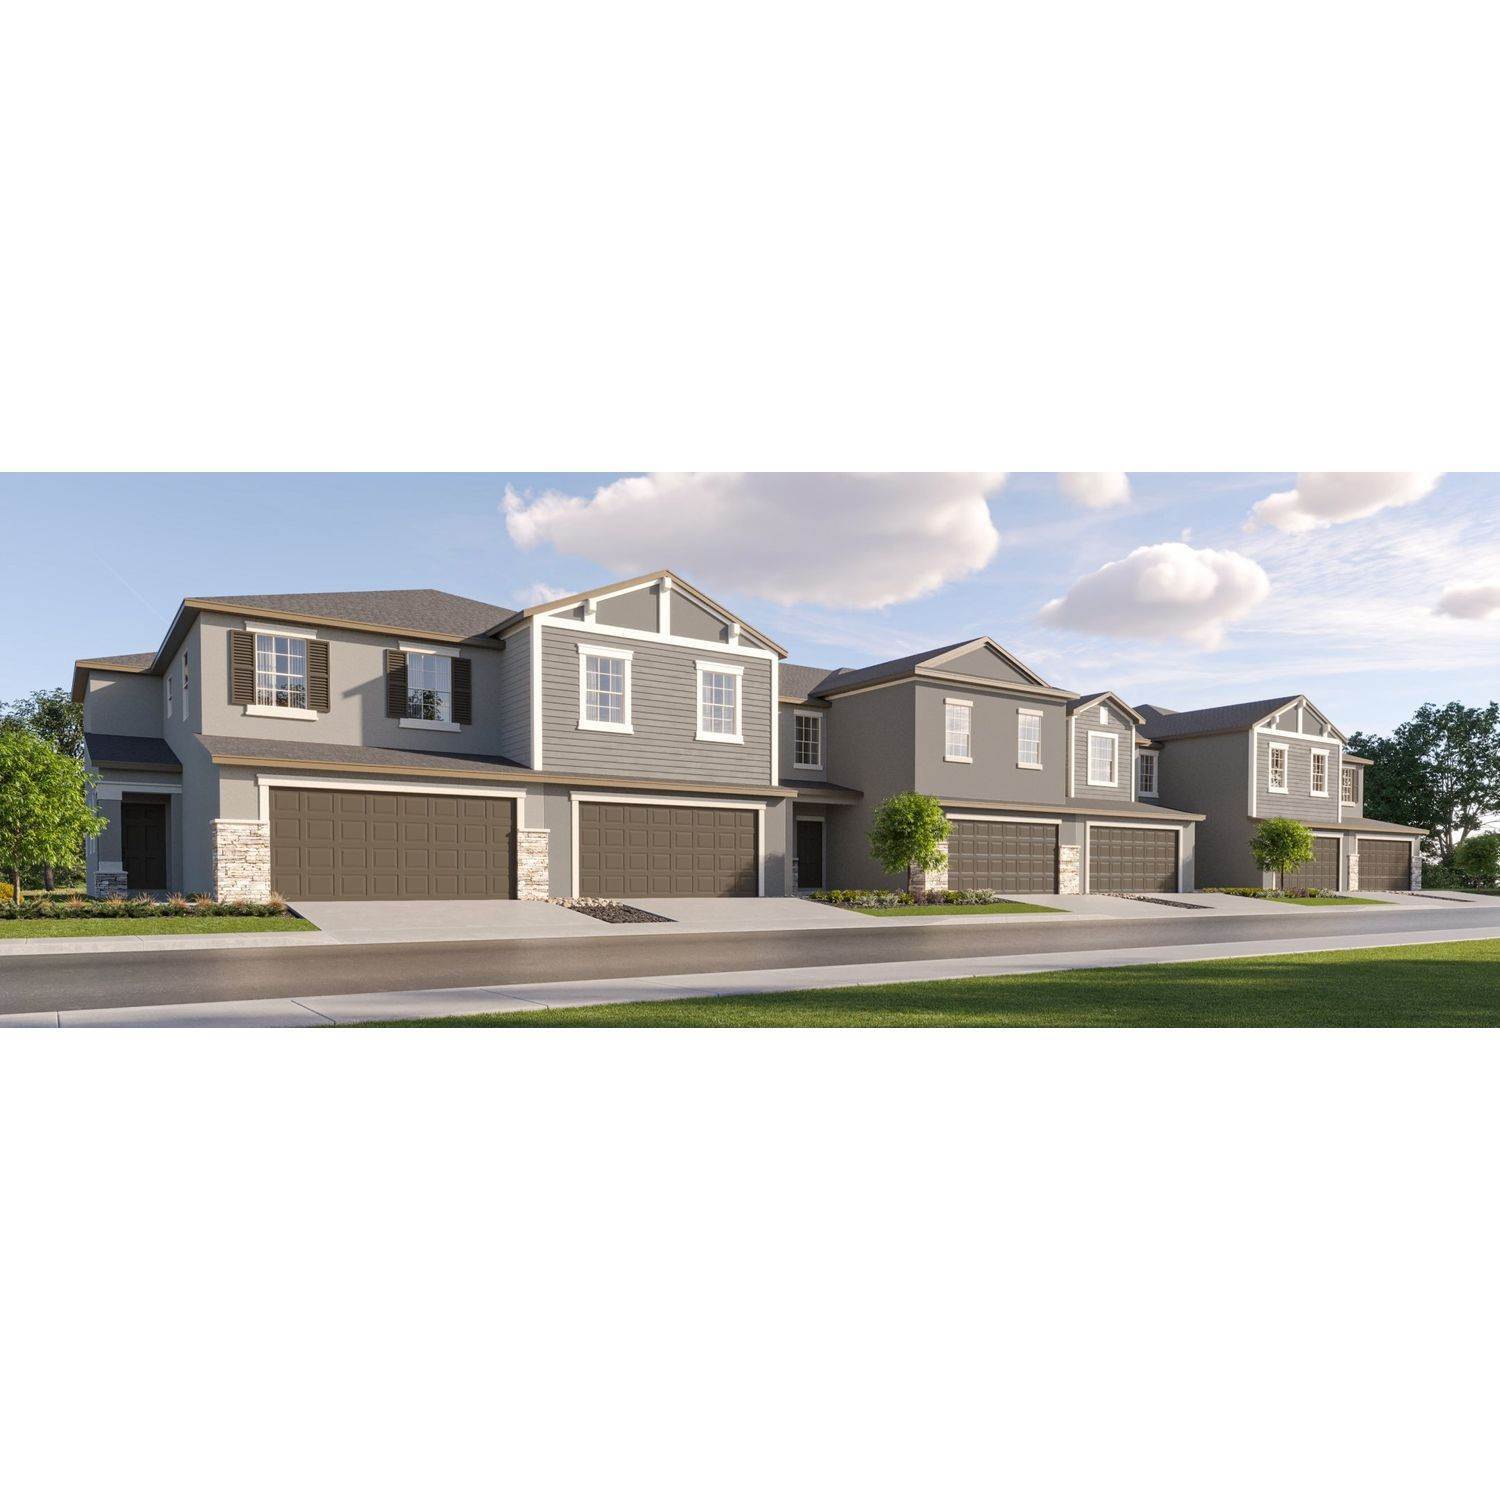 Angeline - The Townhomes Gebäude bei 17516 Nectar Flume Drive, Land O' Lakes, FL 34638